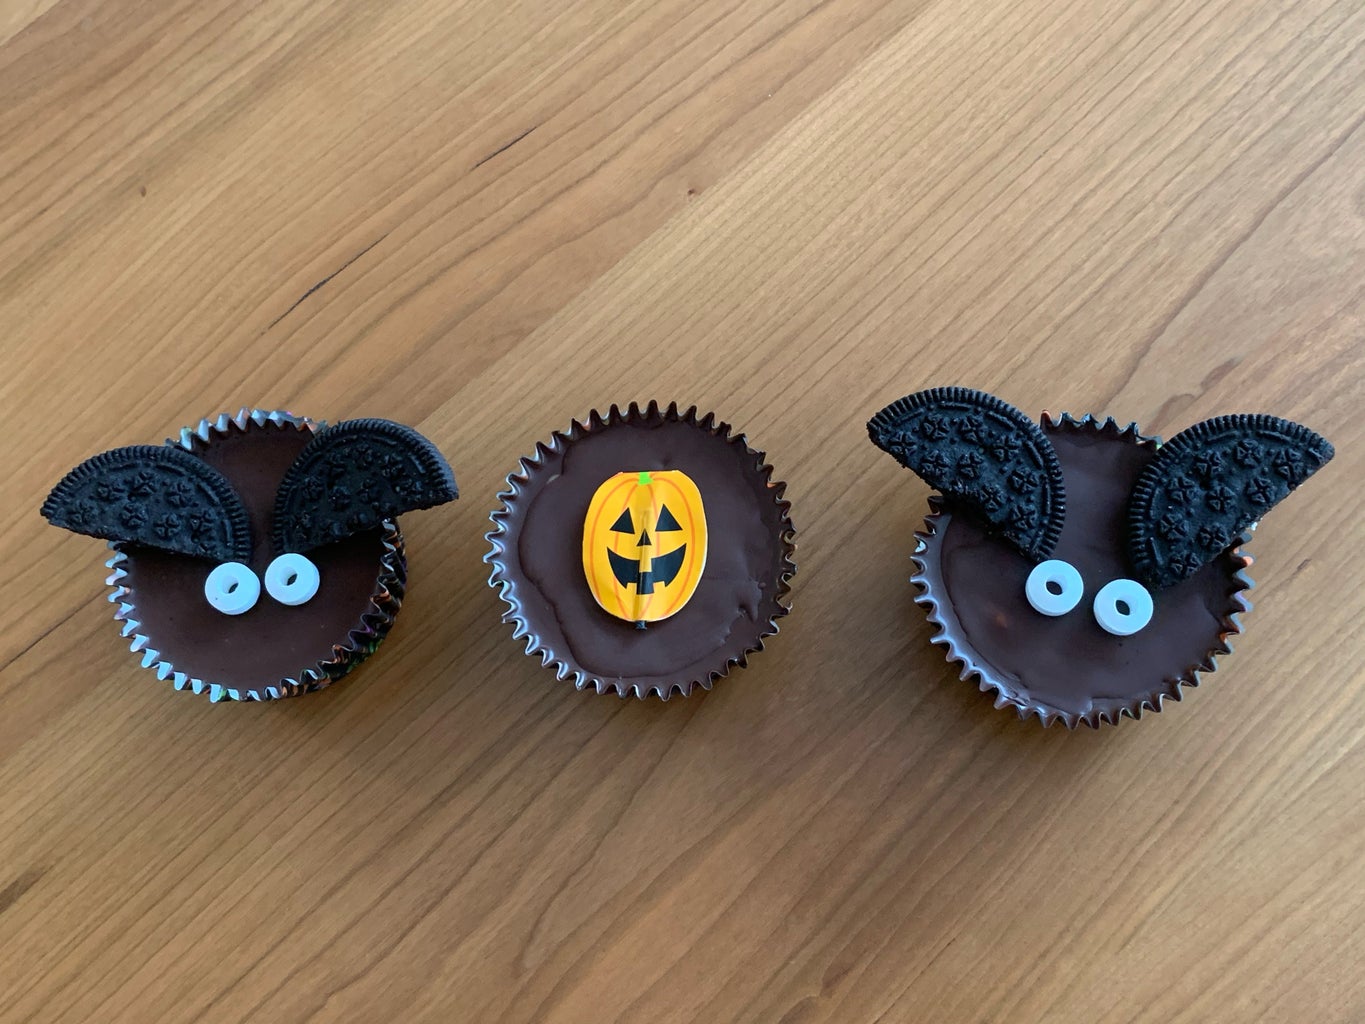 2 bat shaped peanut butter cups and a pumpkin peanut butter cup on a table.